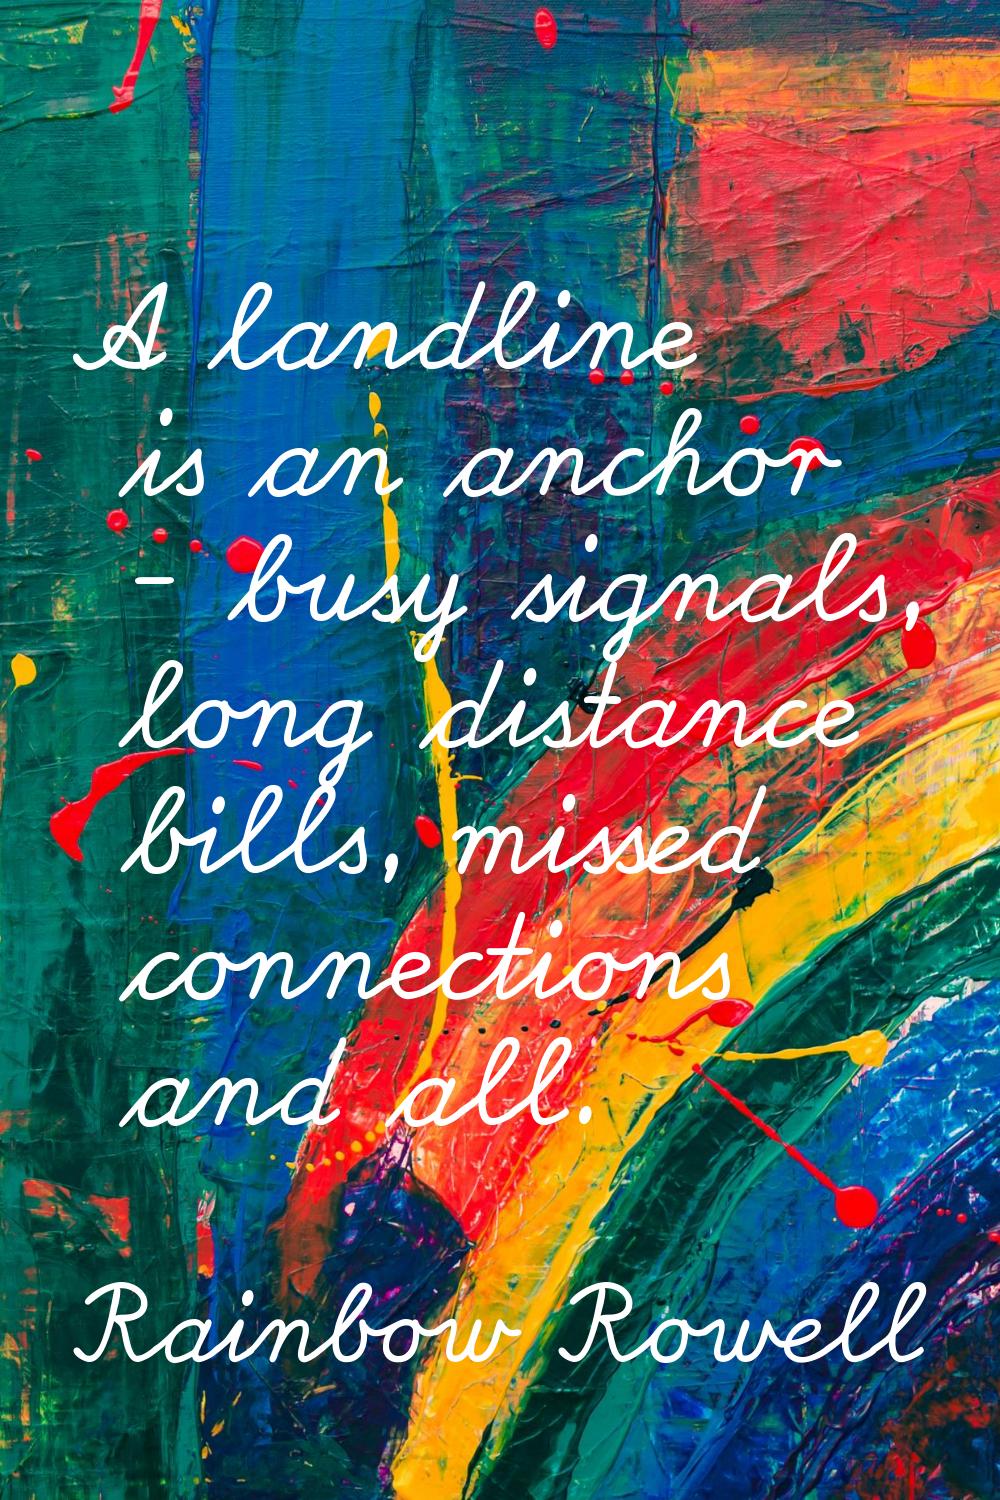 A landline is an anchor - busy signals, long distance bills, missed connections and all.